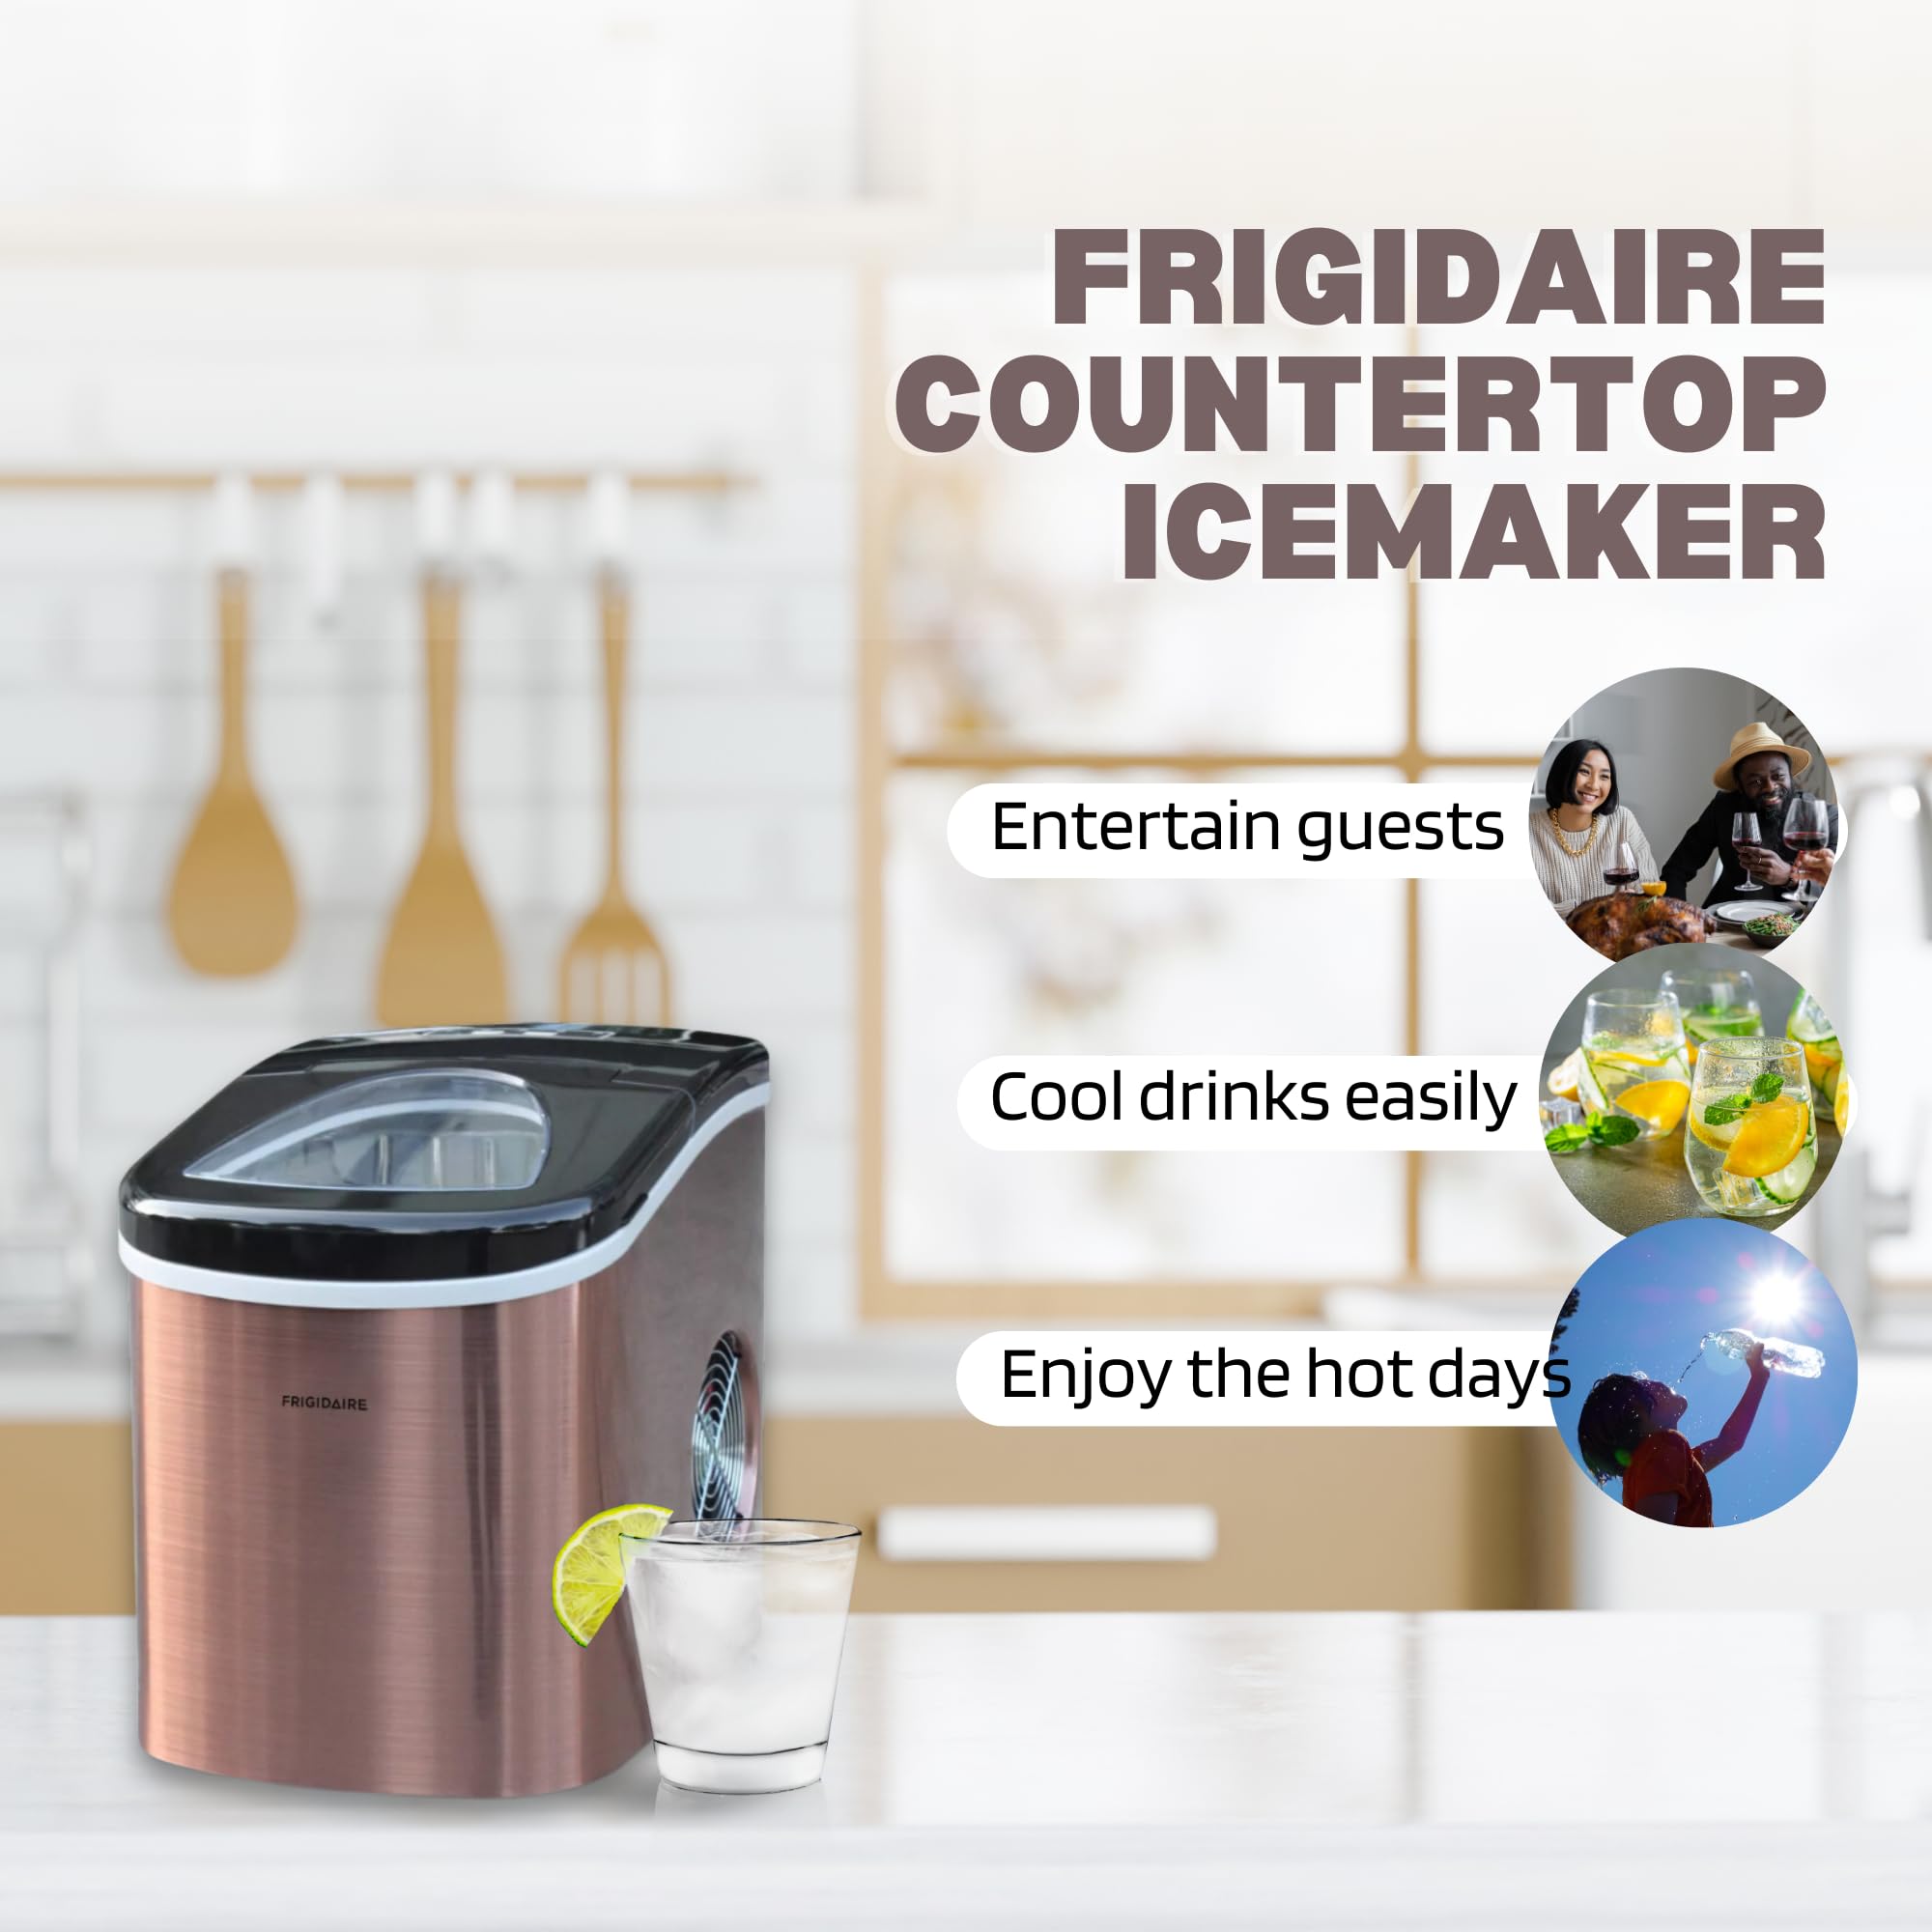 FRIGIDAIRE - Stainless Steel Countertop Ice Maker Machine with 26 lb Capacity | Ice Machine Makes 9 Cubes Every 7-15 Minutes | Portable Ice Maker for Countertop with Ice Shovel & Drain Plug